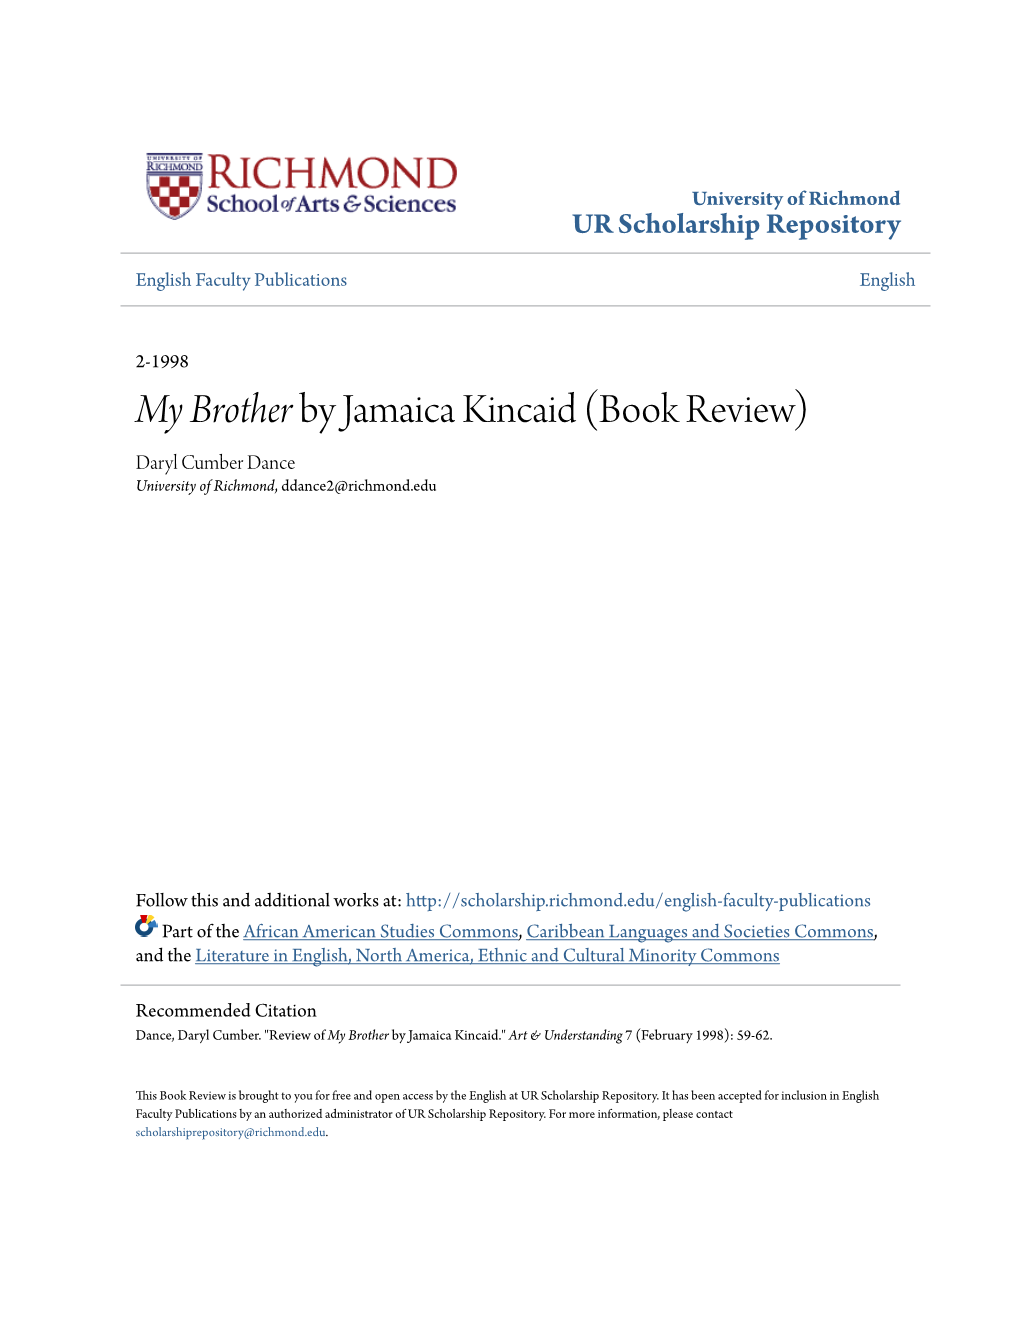 &lt;I&gt;My Brother&lt;/I&gt; by Jamaica Kincaid (Book Review)